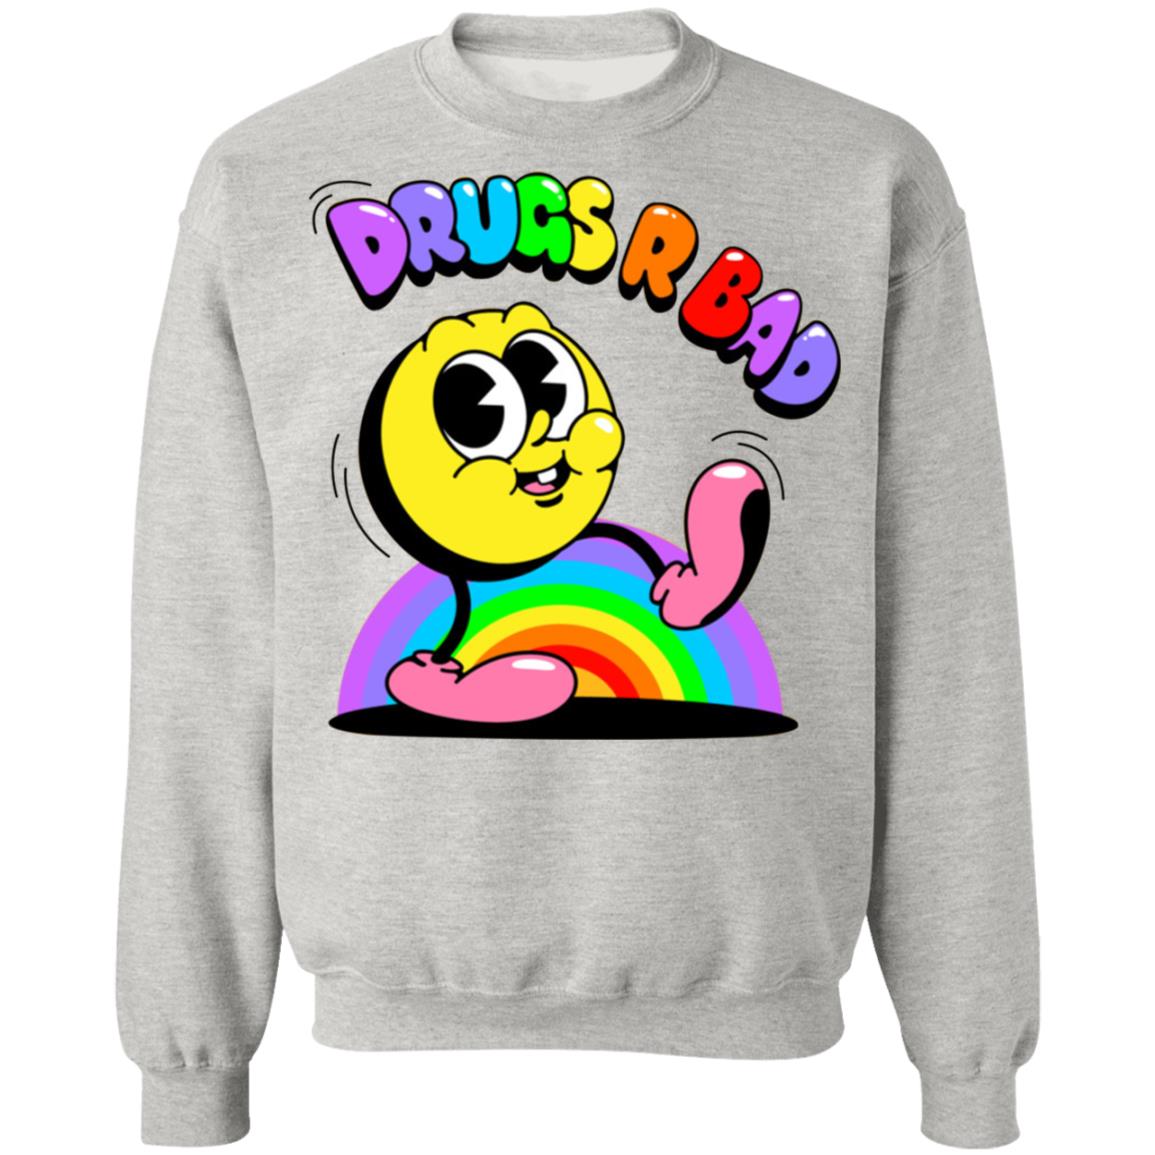 Gift for Him Her T Shirt T-Shirt Drugs are Bad White Pill Shirt